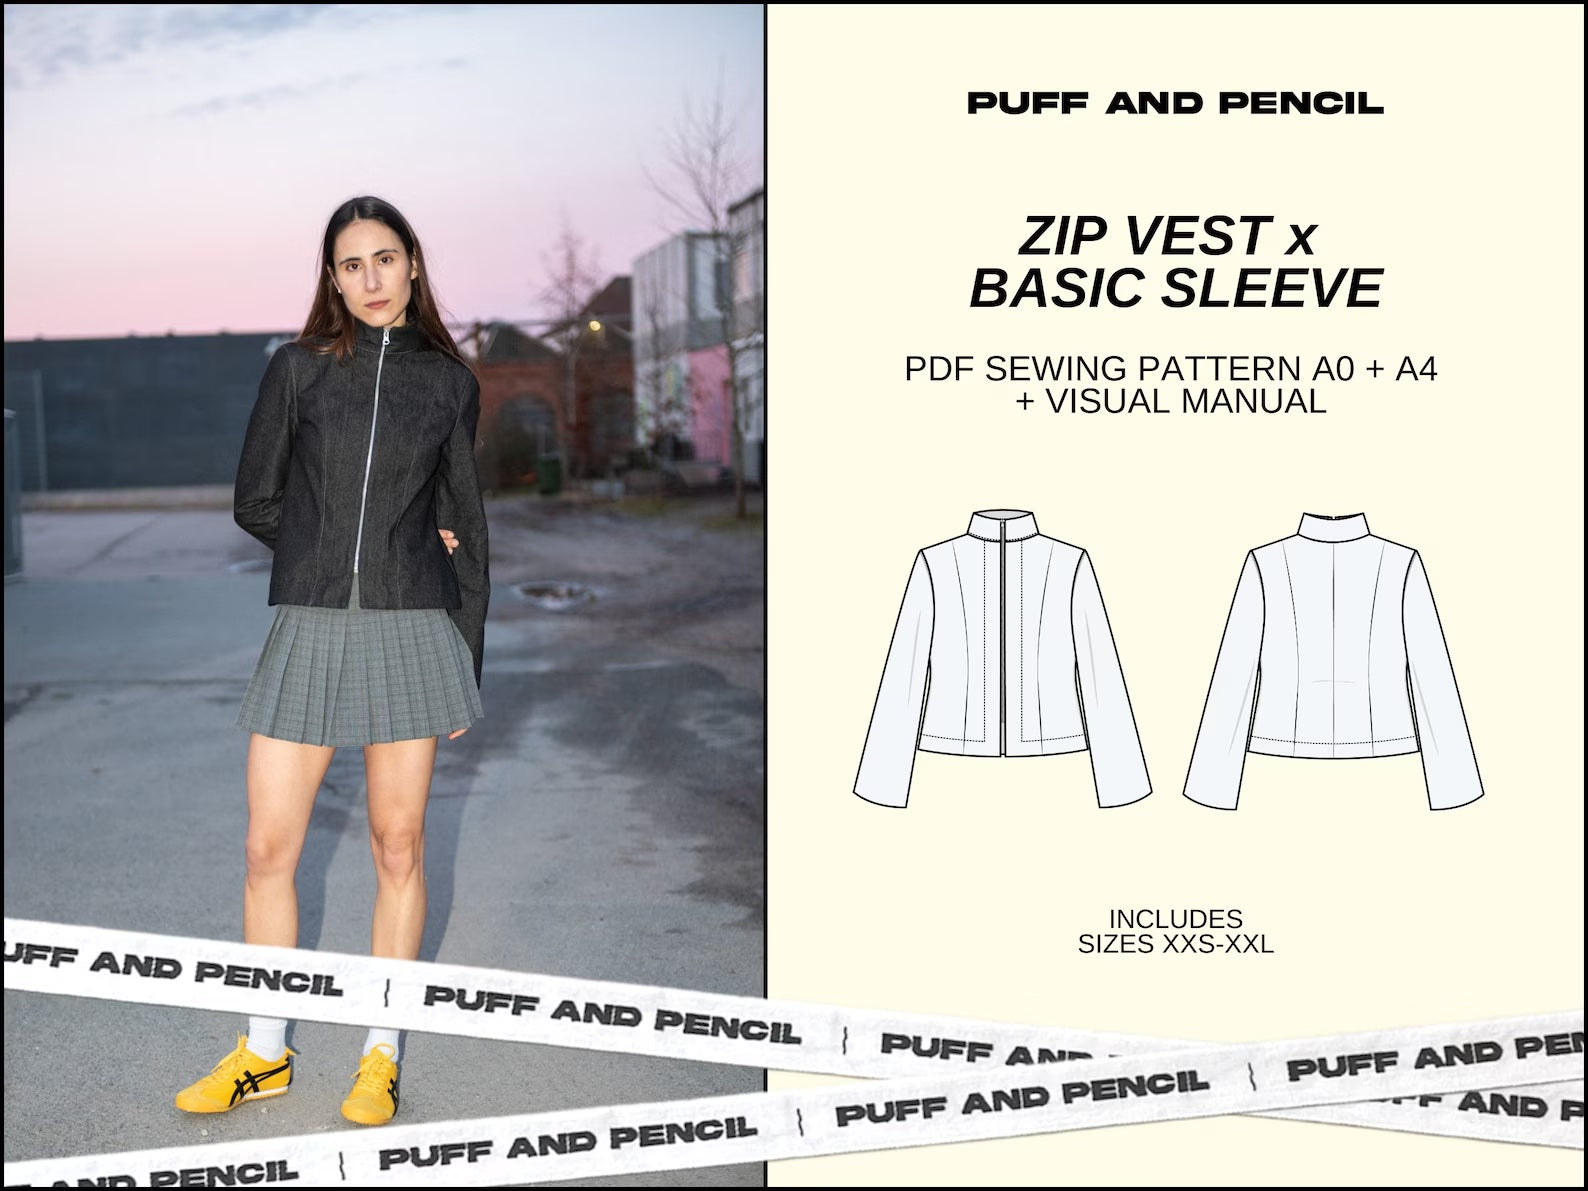 Puff and Pencil Zip Vest & Basic Sleeve